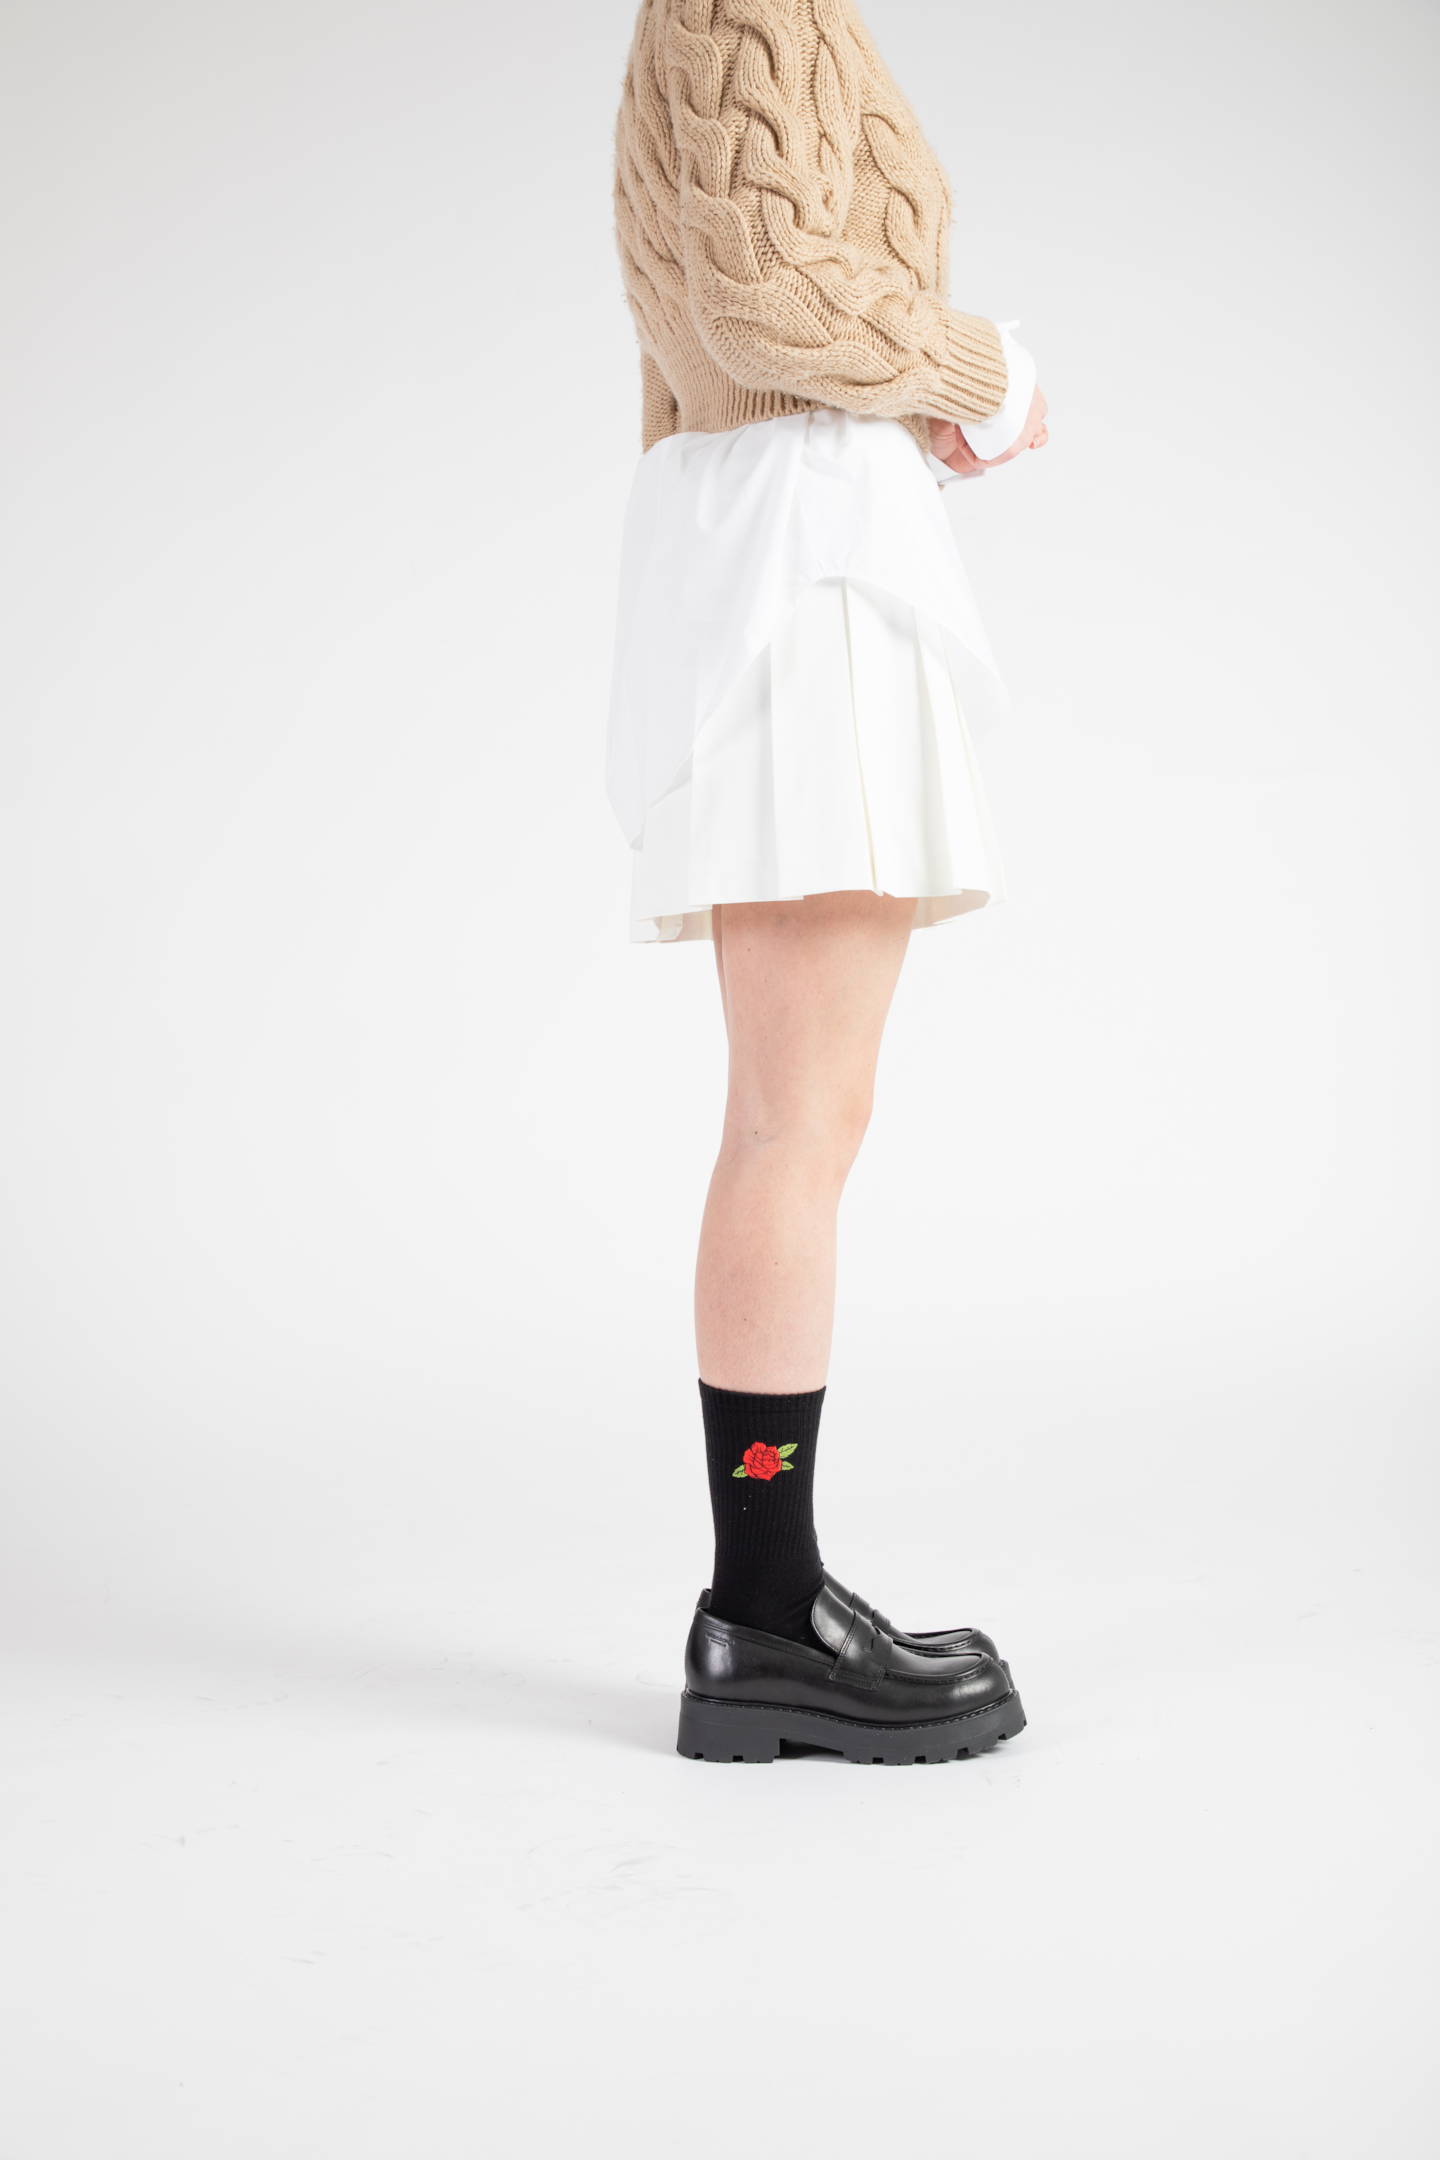 A female model wears black leather loafers with a pair of black crew socks with a red rose embroidered.